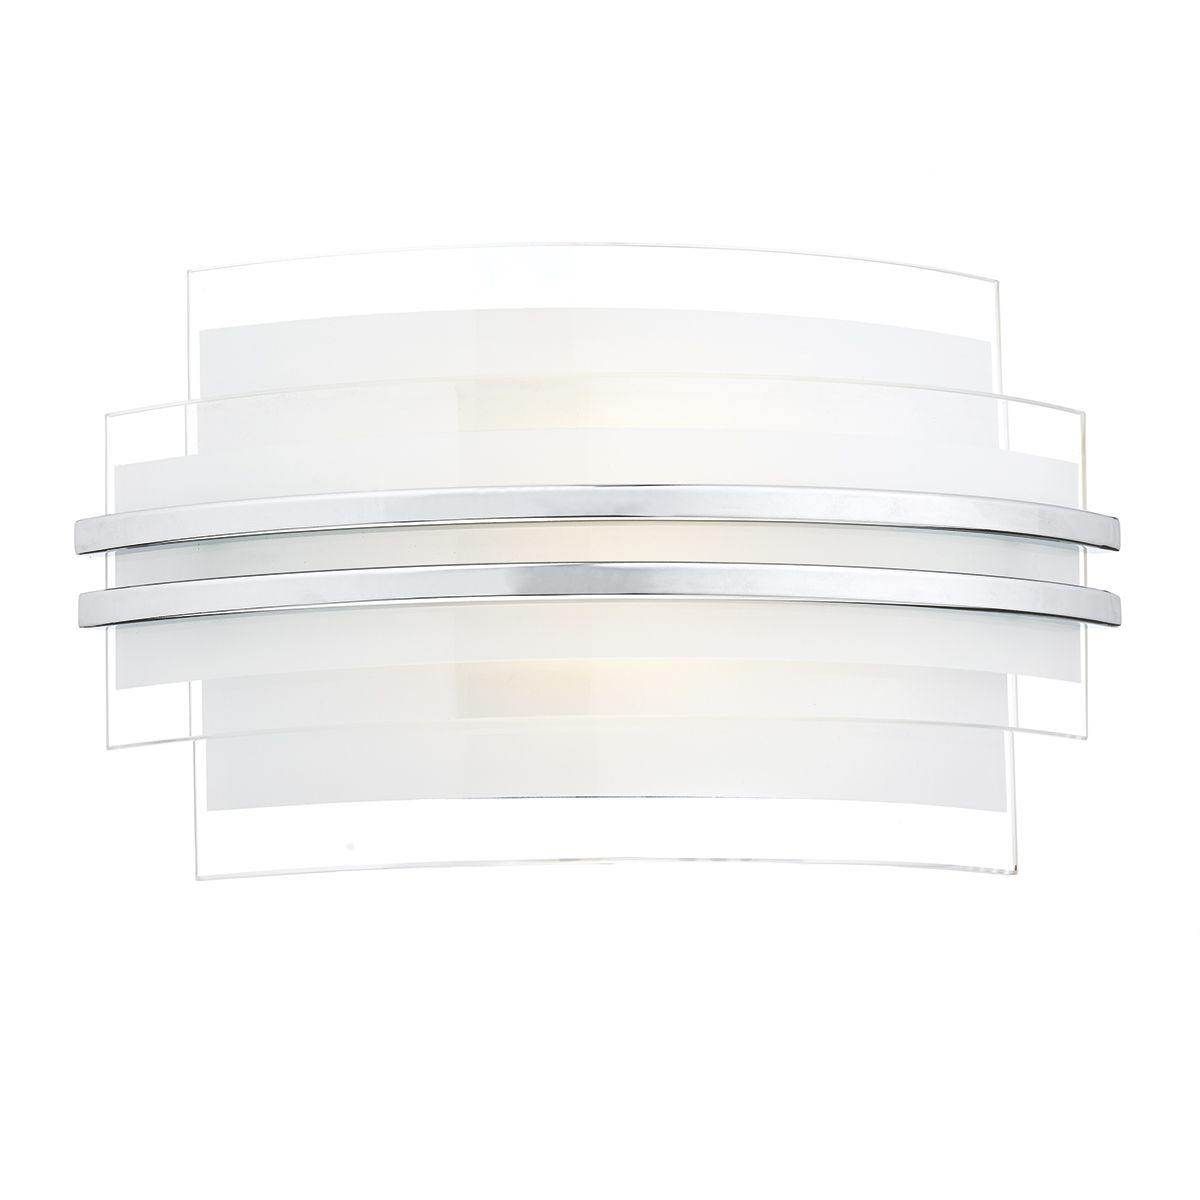 Dar Sector Double Trim LED Wall Bracket Small - Cusack Lighting